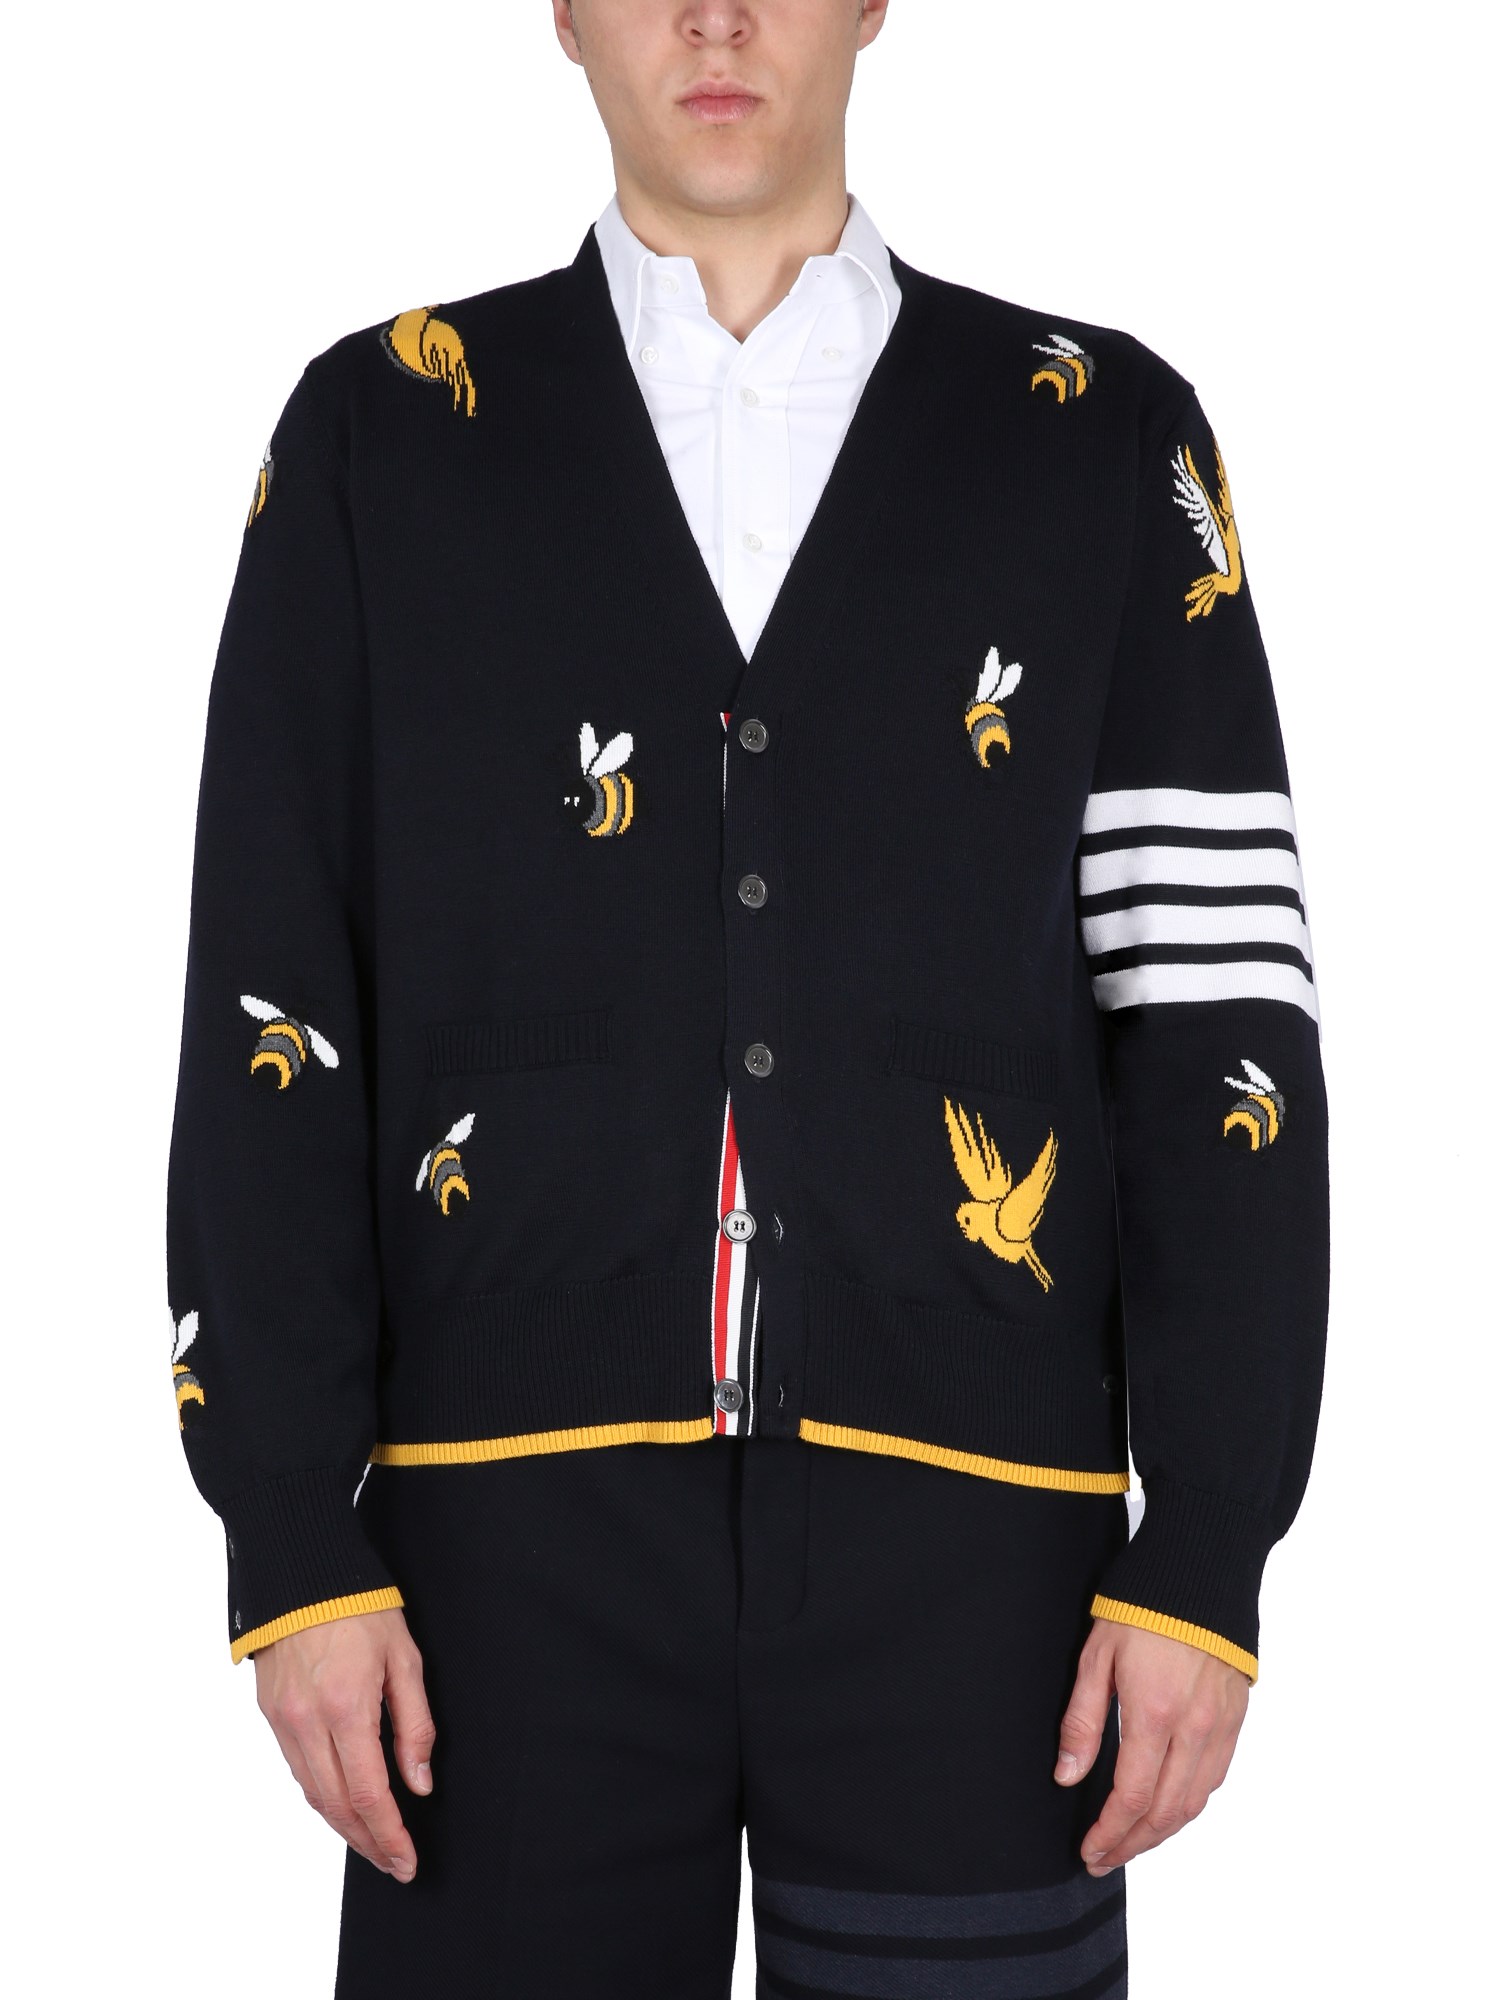 thom browne cardigan with birds and bees inlays